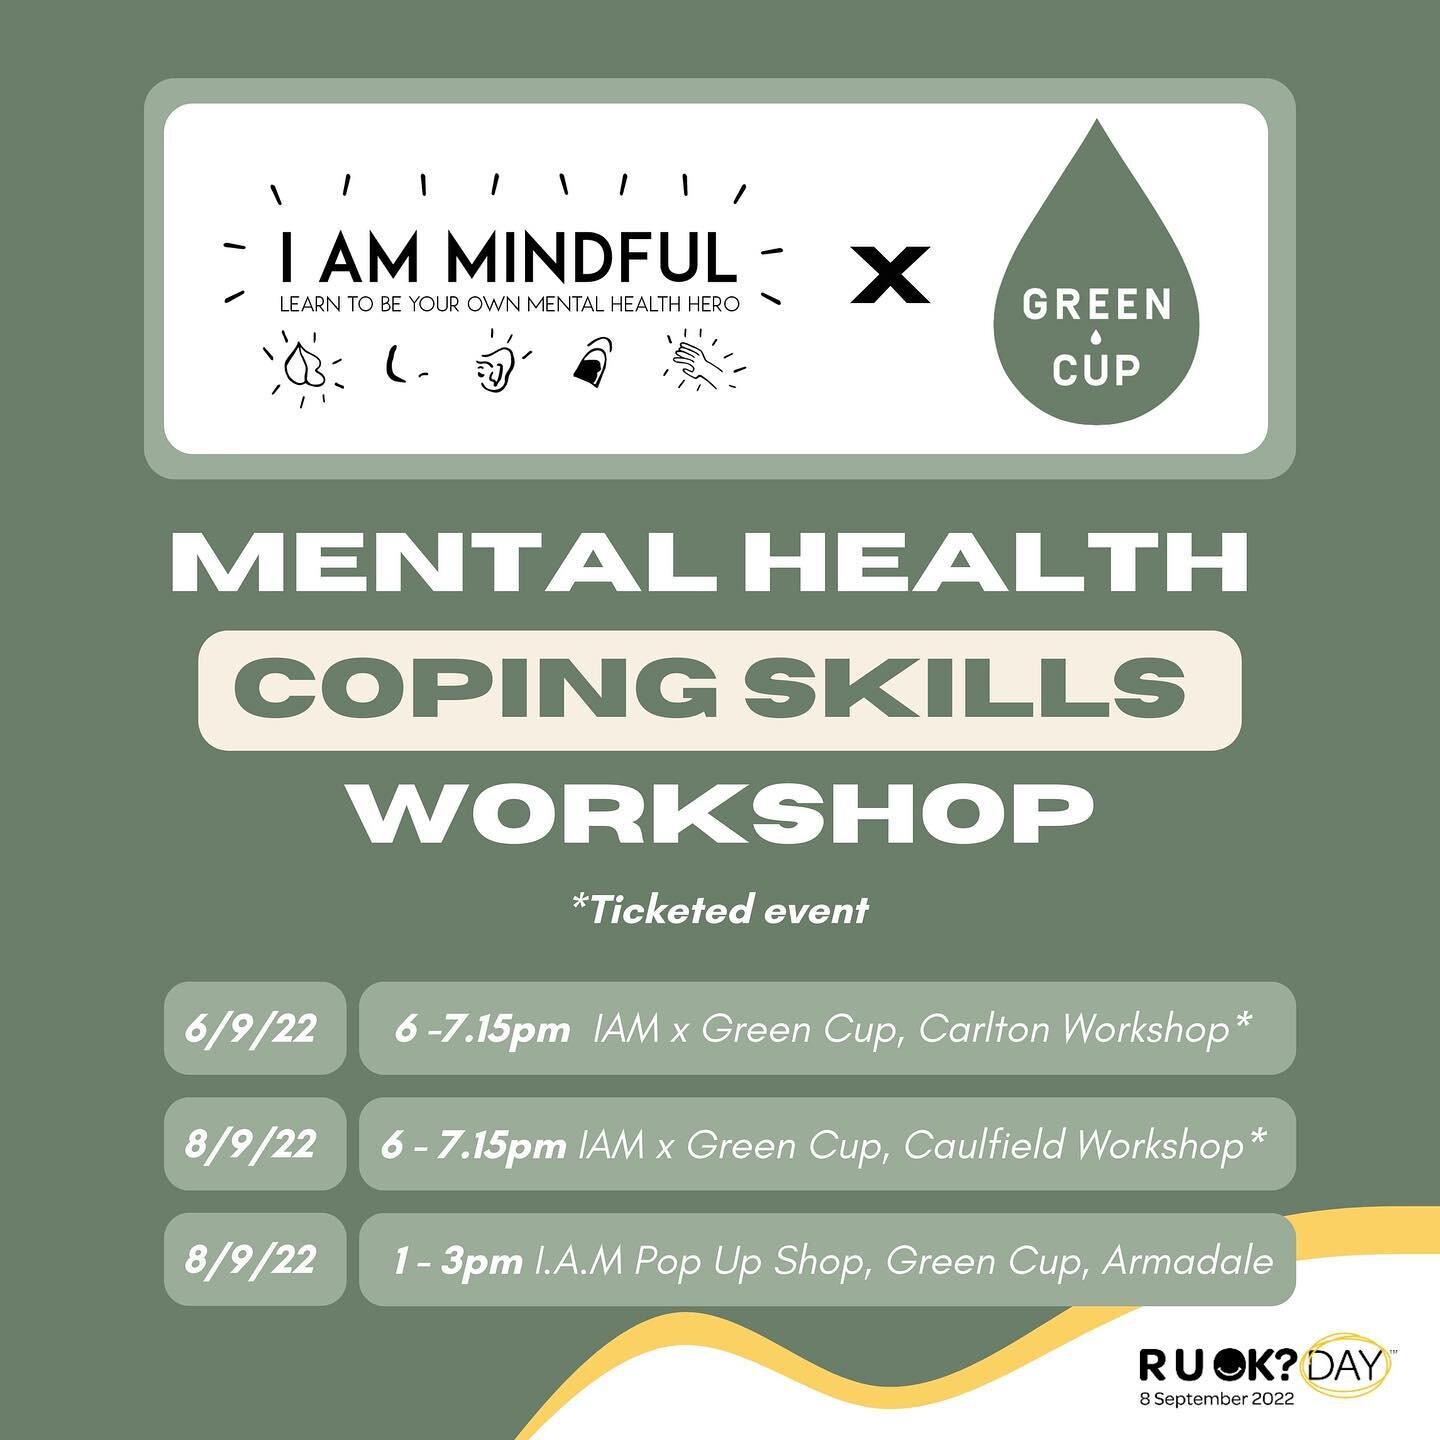 💛🧠RUOK? DAY WORKSHOP 🧠💛

SO excited to partner with @green.cup to run a series of in store activites and workshops around @ruokday 

@i.am.mindful_ mental health workshop tickets are limited and will help people learn mental health coping skills 